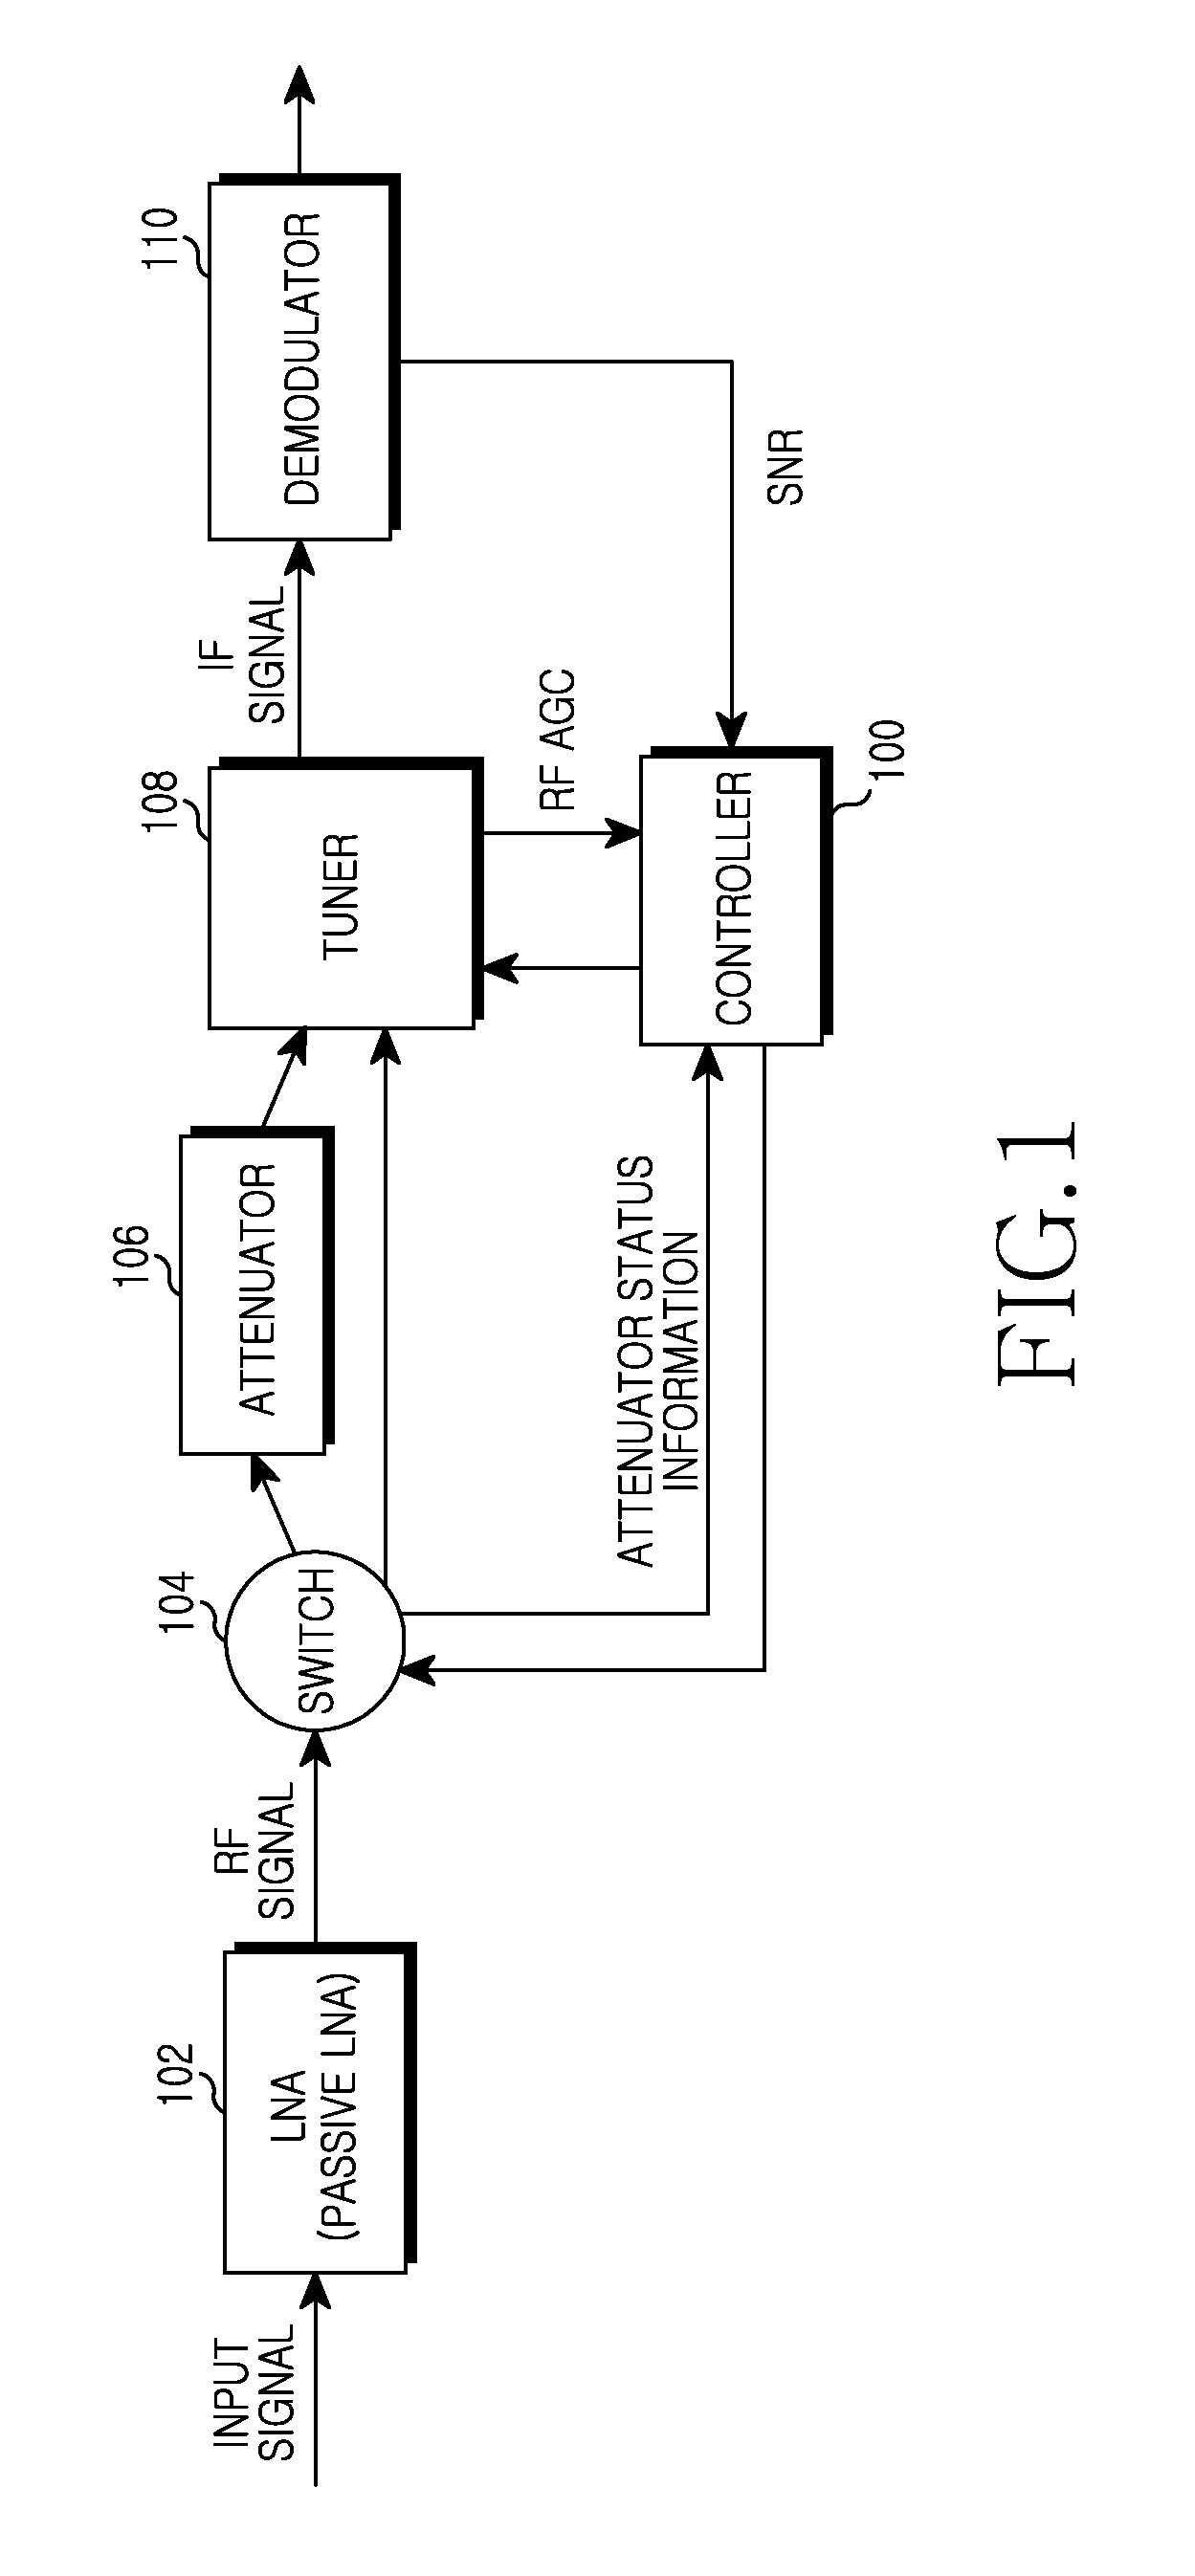 Apparatus and method for performing attenuation function in cable broadcast receiver